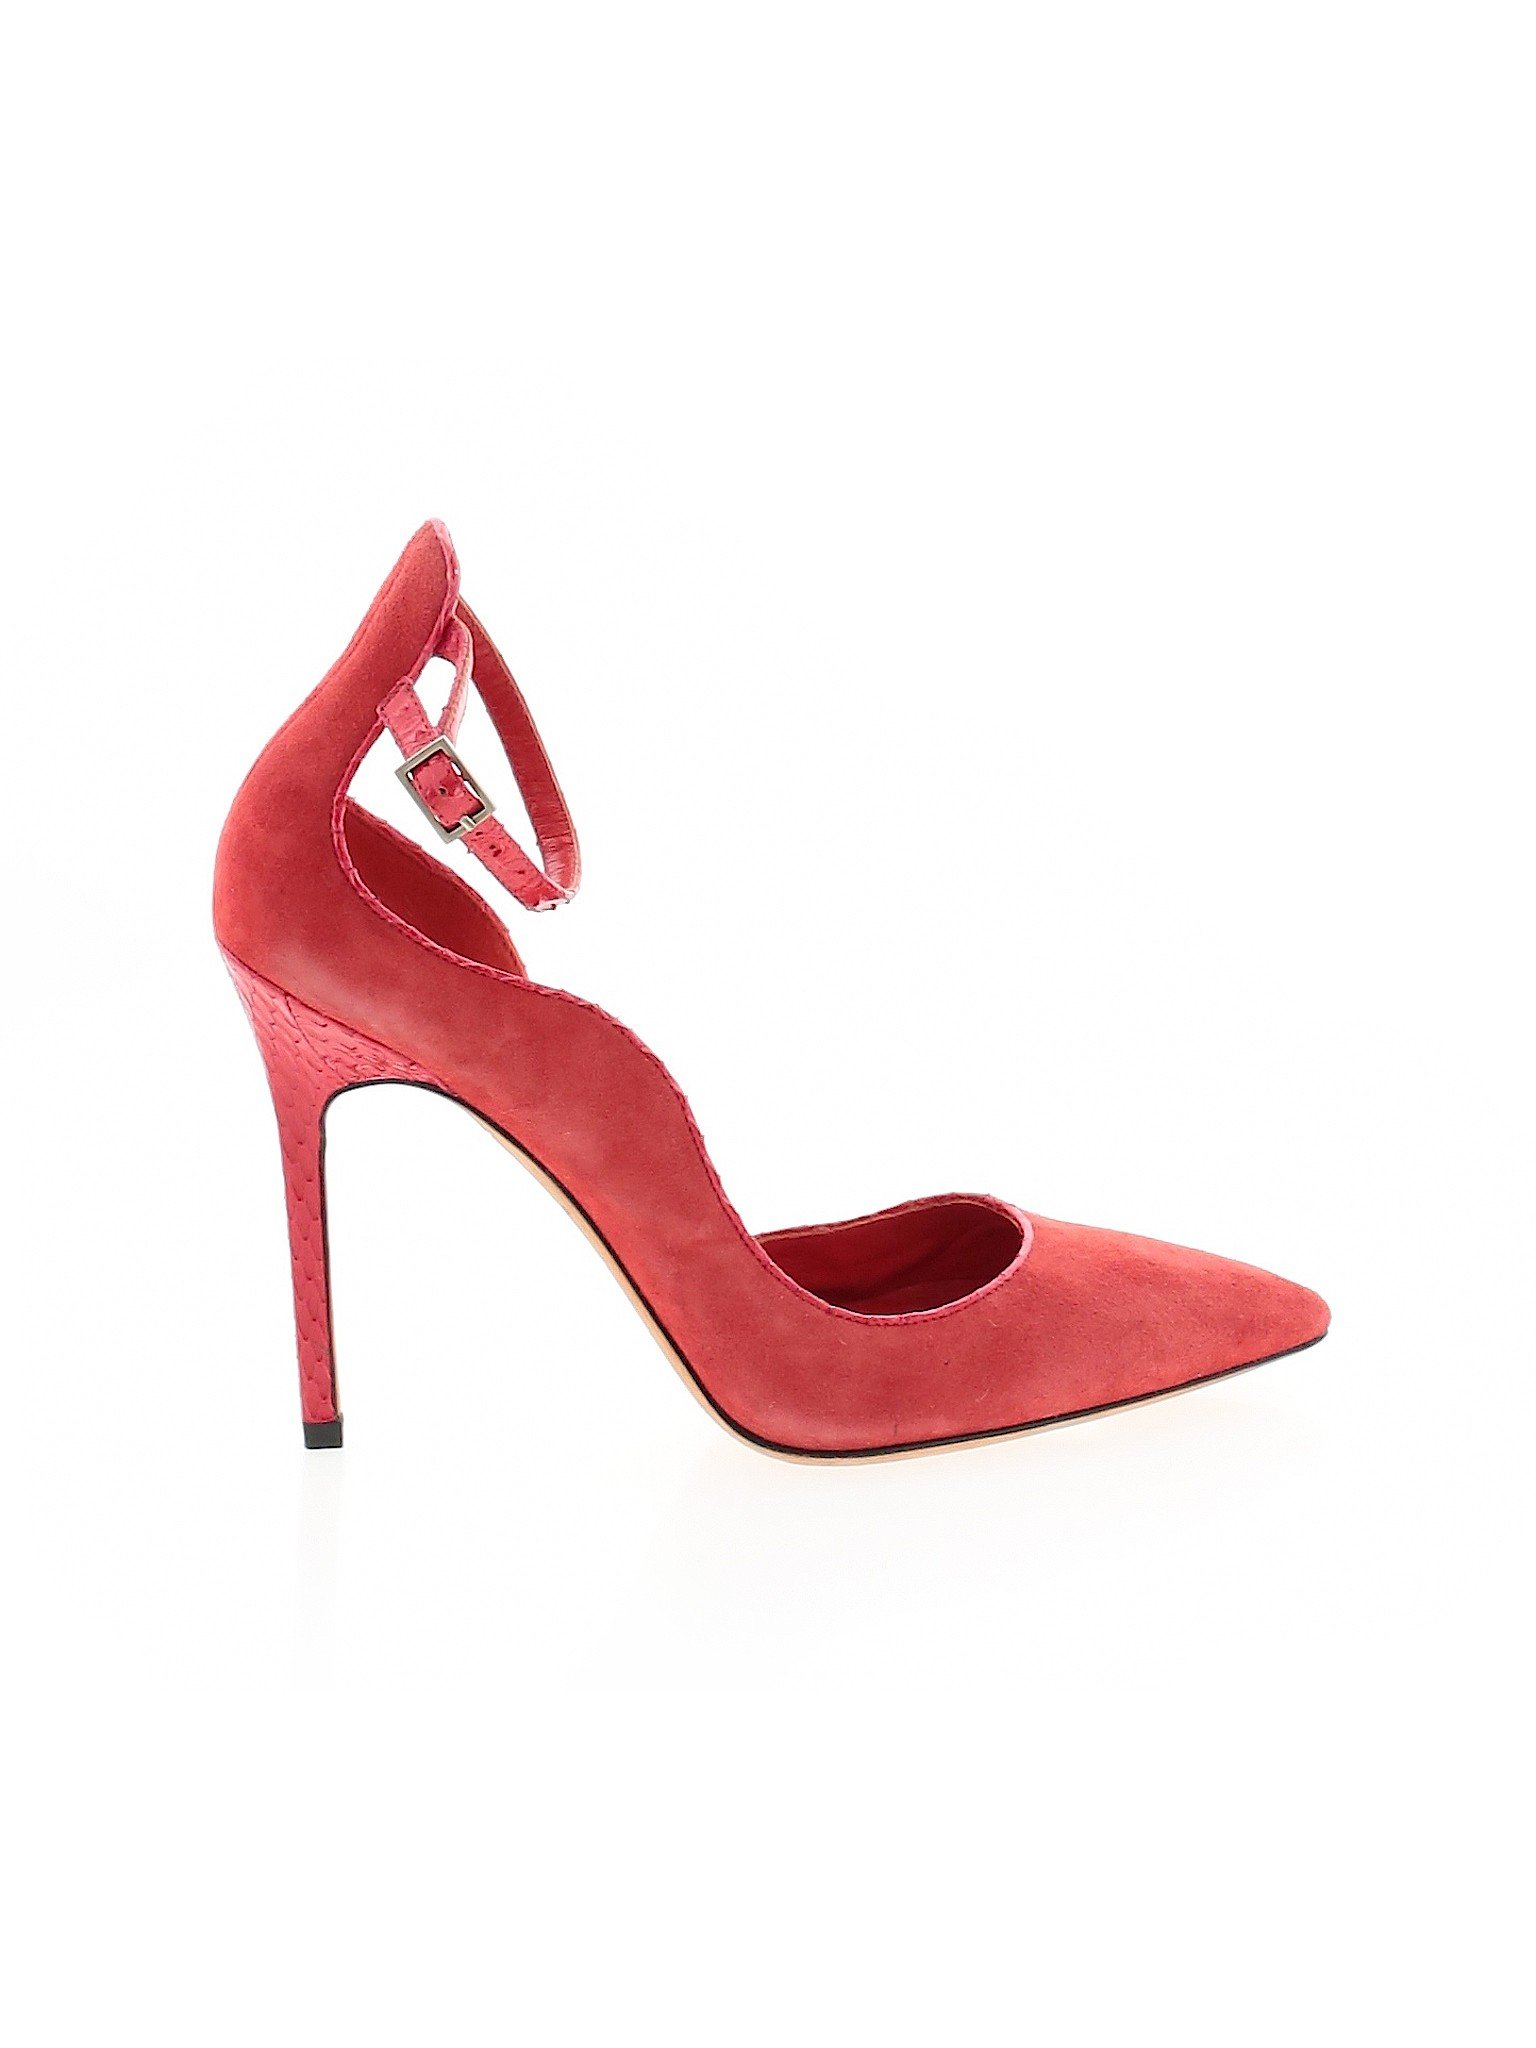 brian atwood red heels